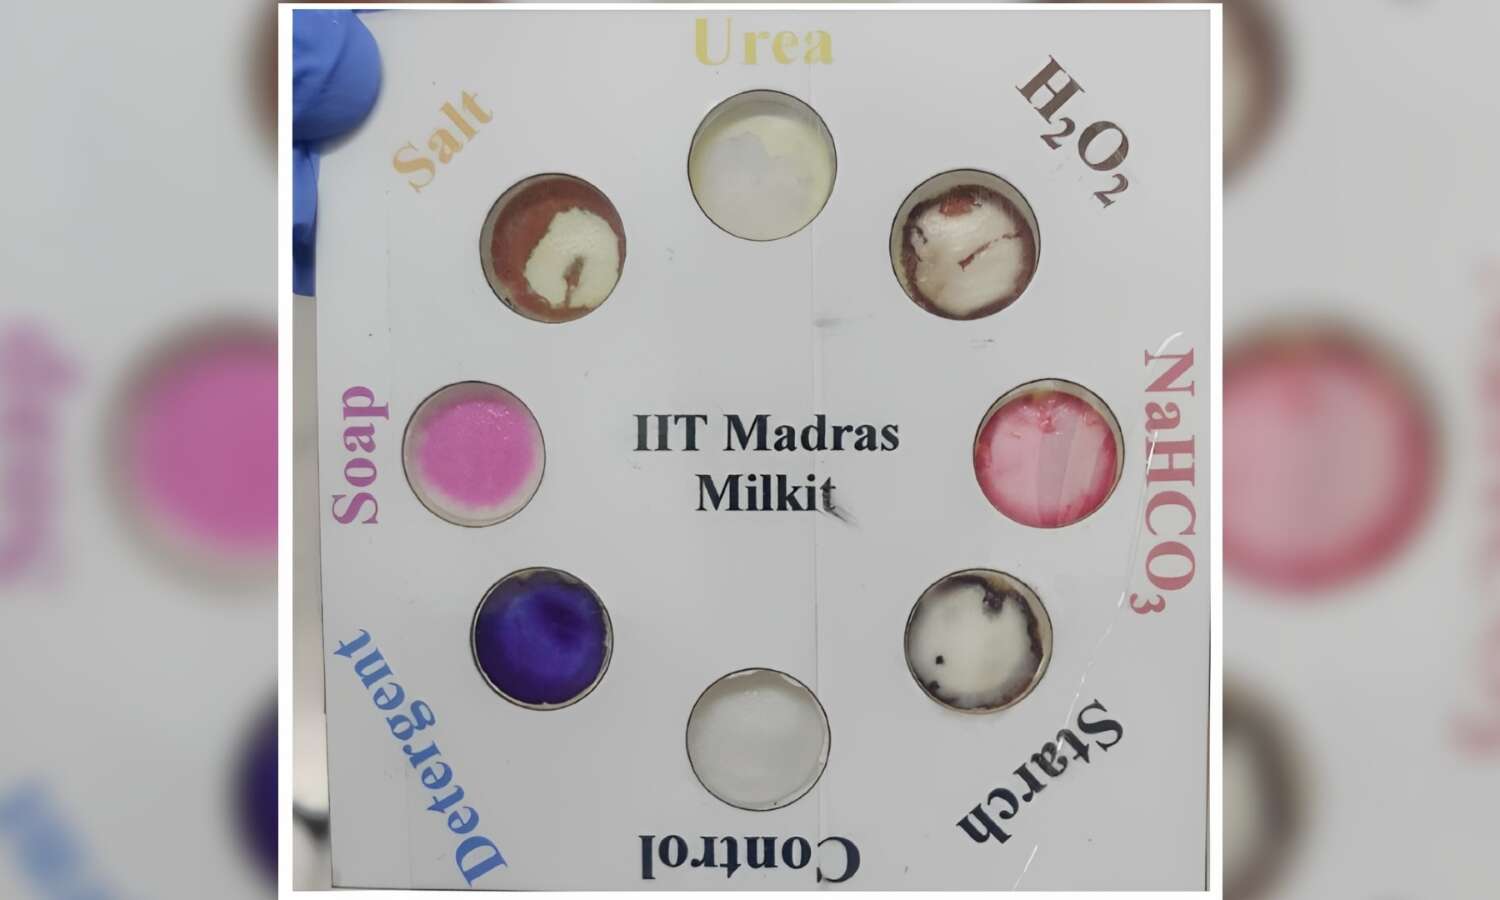 IIT-M develops pocket-friendly device to detect milk adulteration